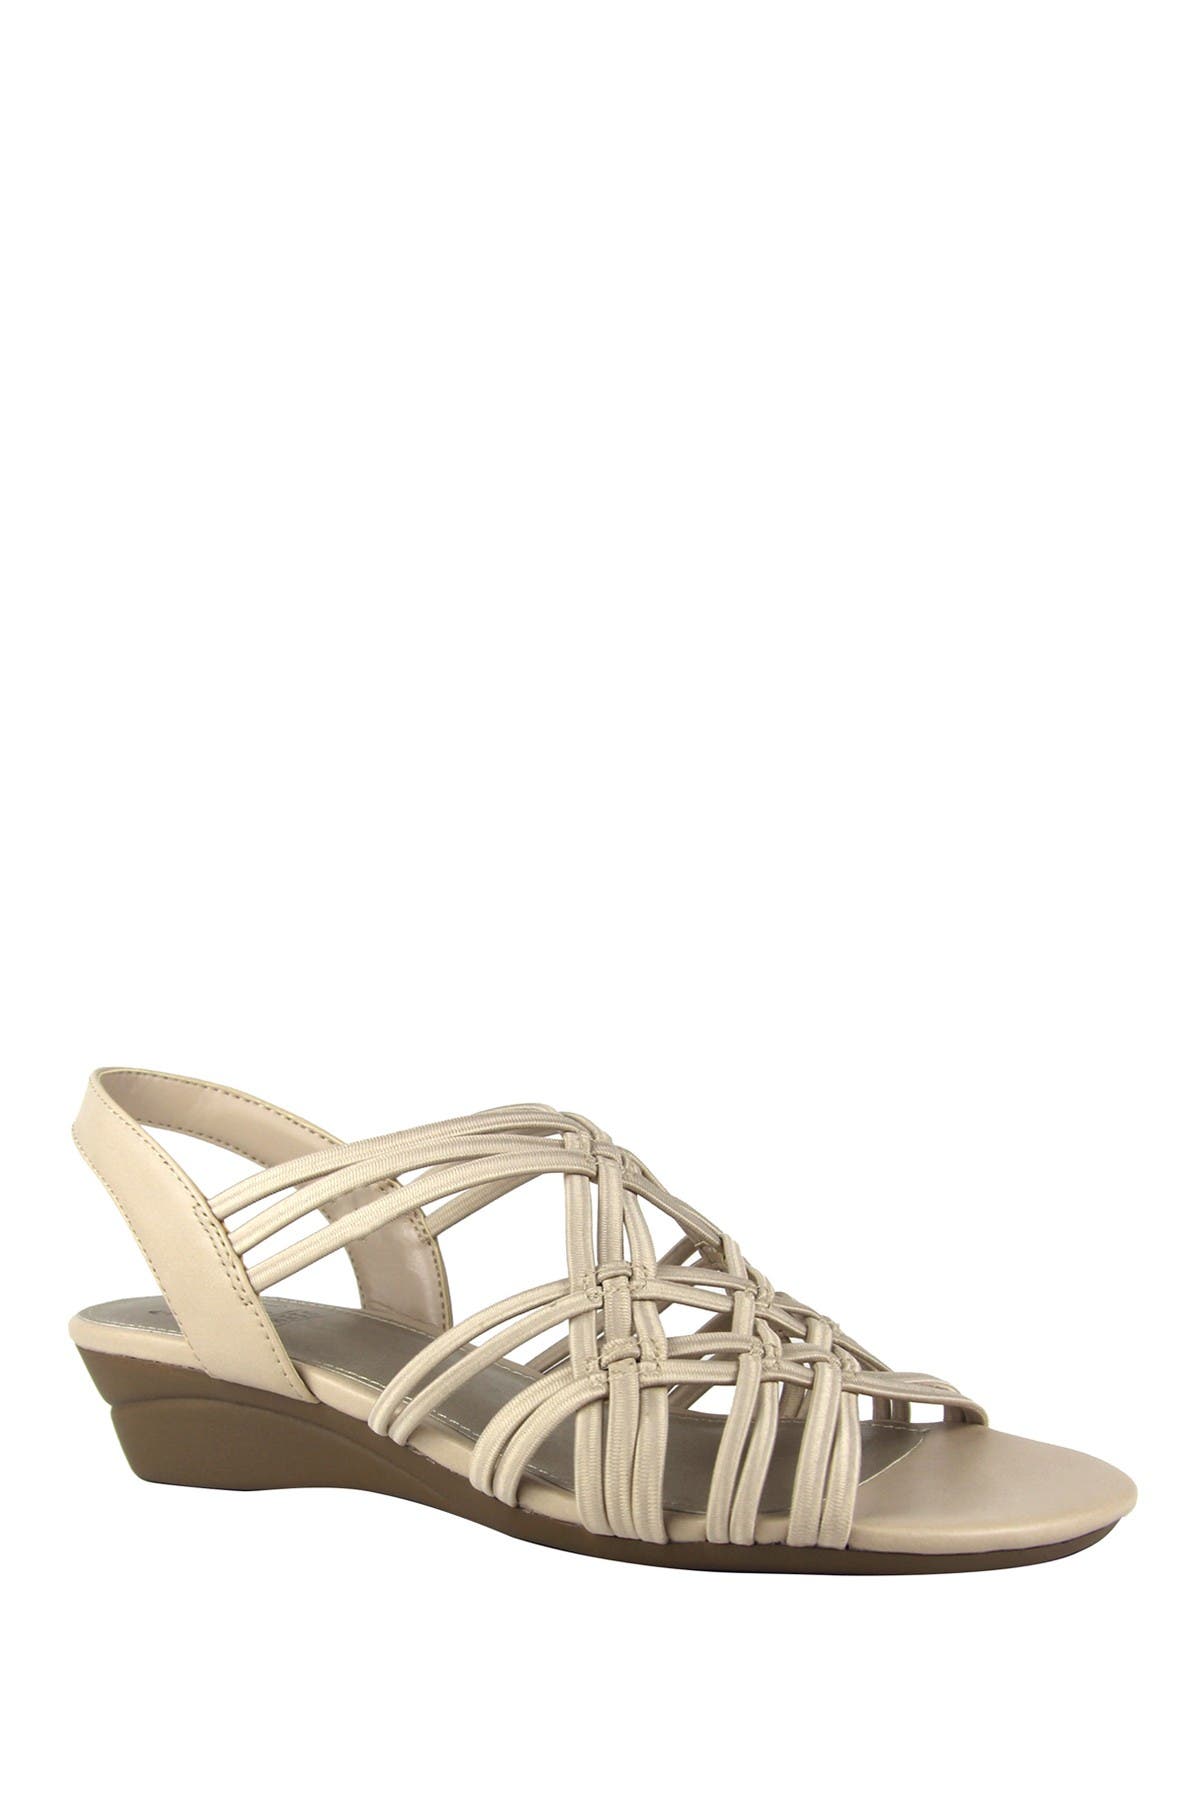 Impo Rainelle Stretch Wedge Sandal In Praline